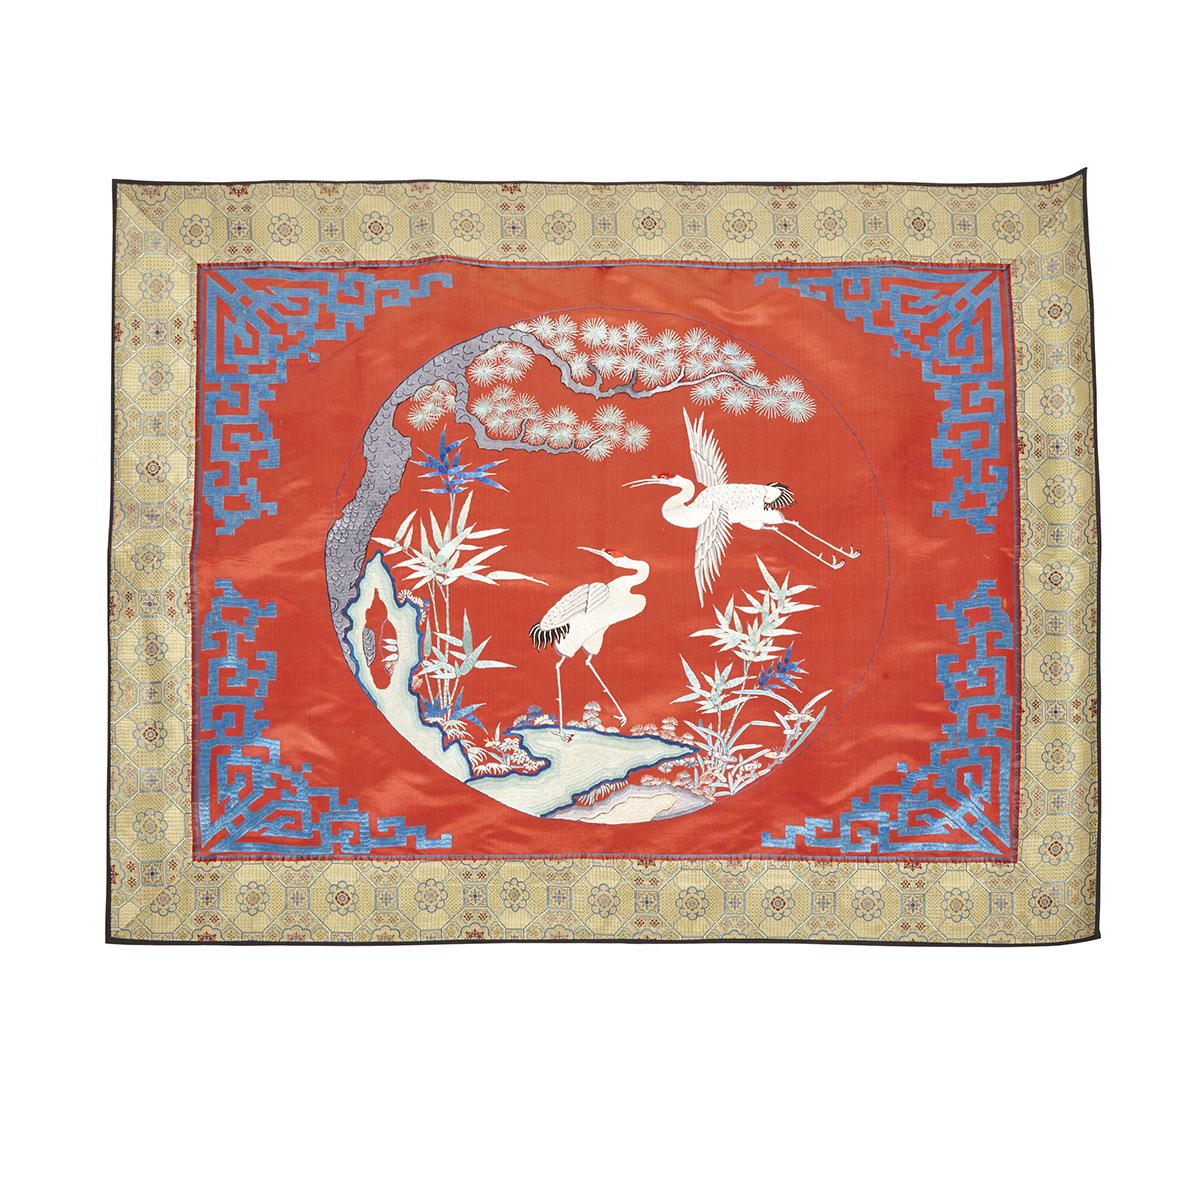 Red Ground Silk Embroidery with Cranes, 20th Century